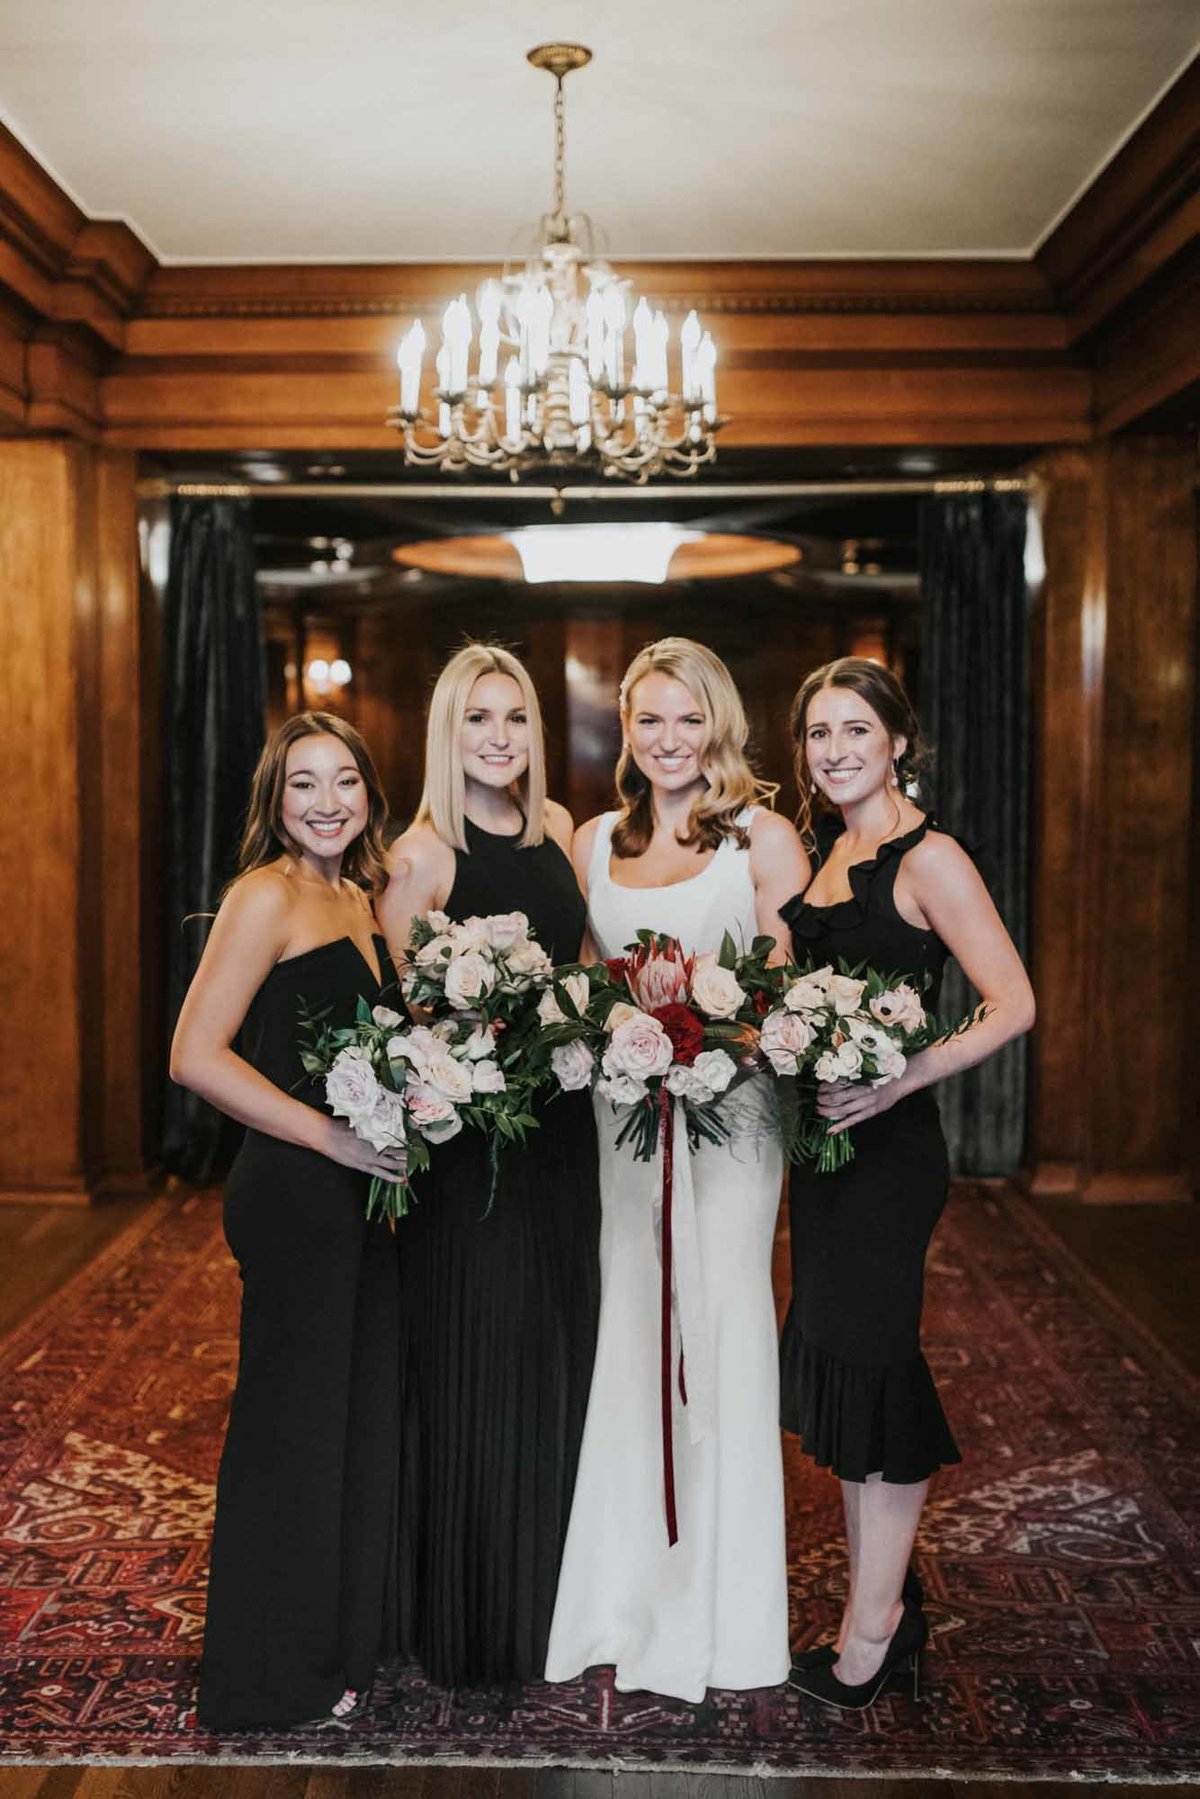 bride and bride's maids in black dresses with winter bouquets in red and white